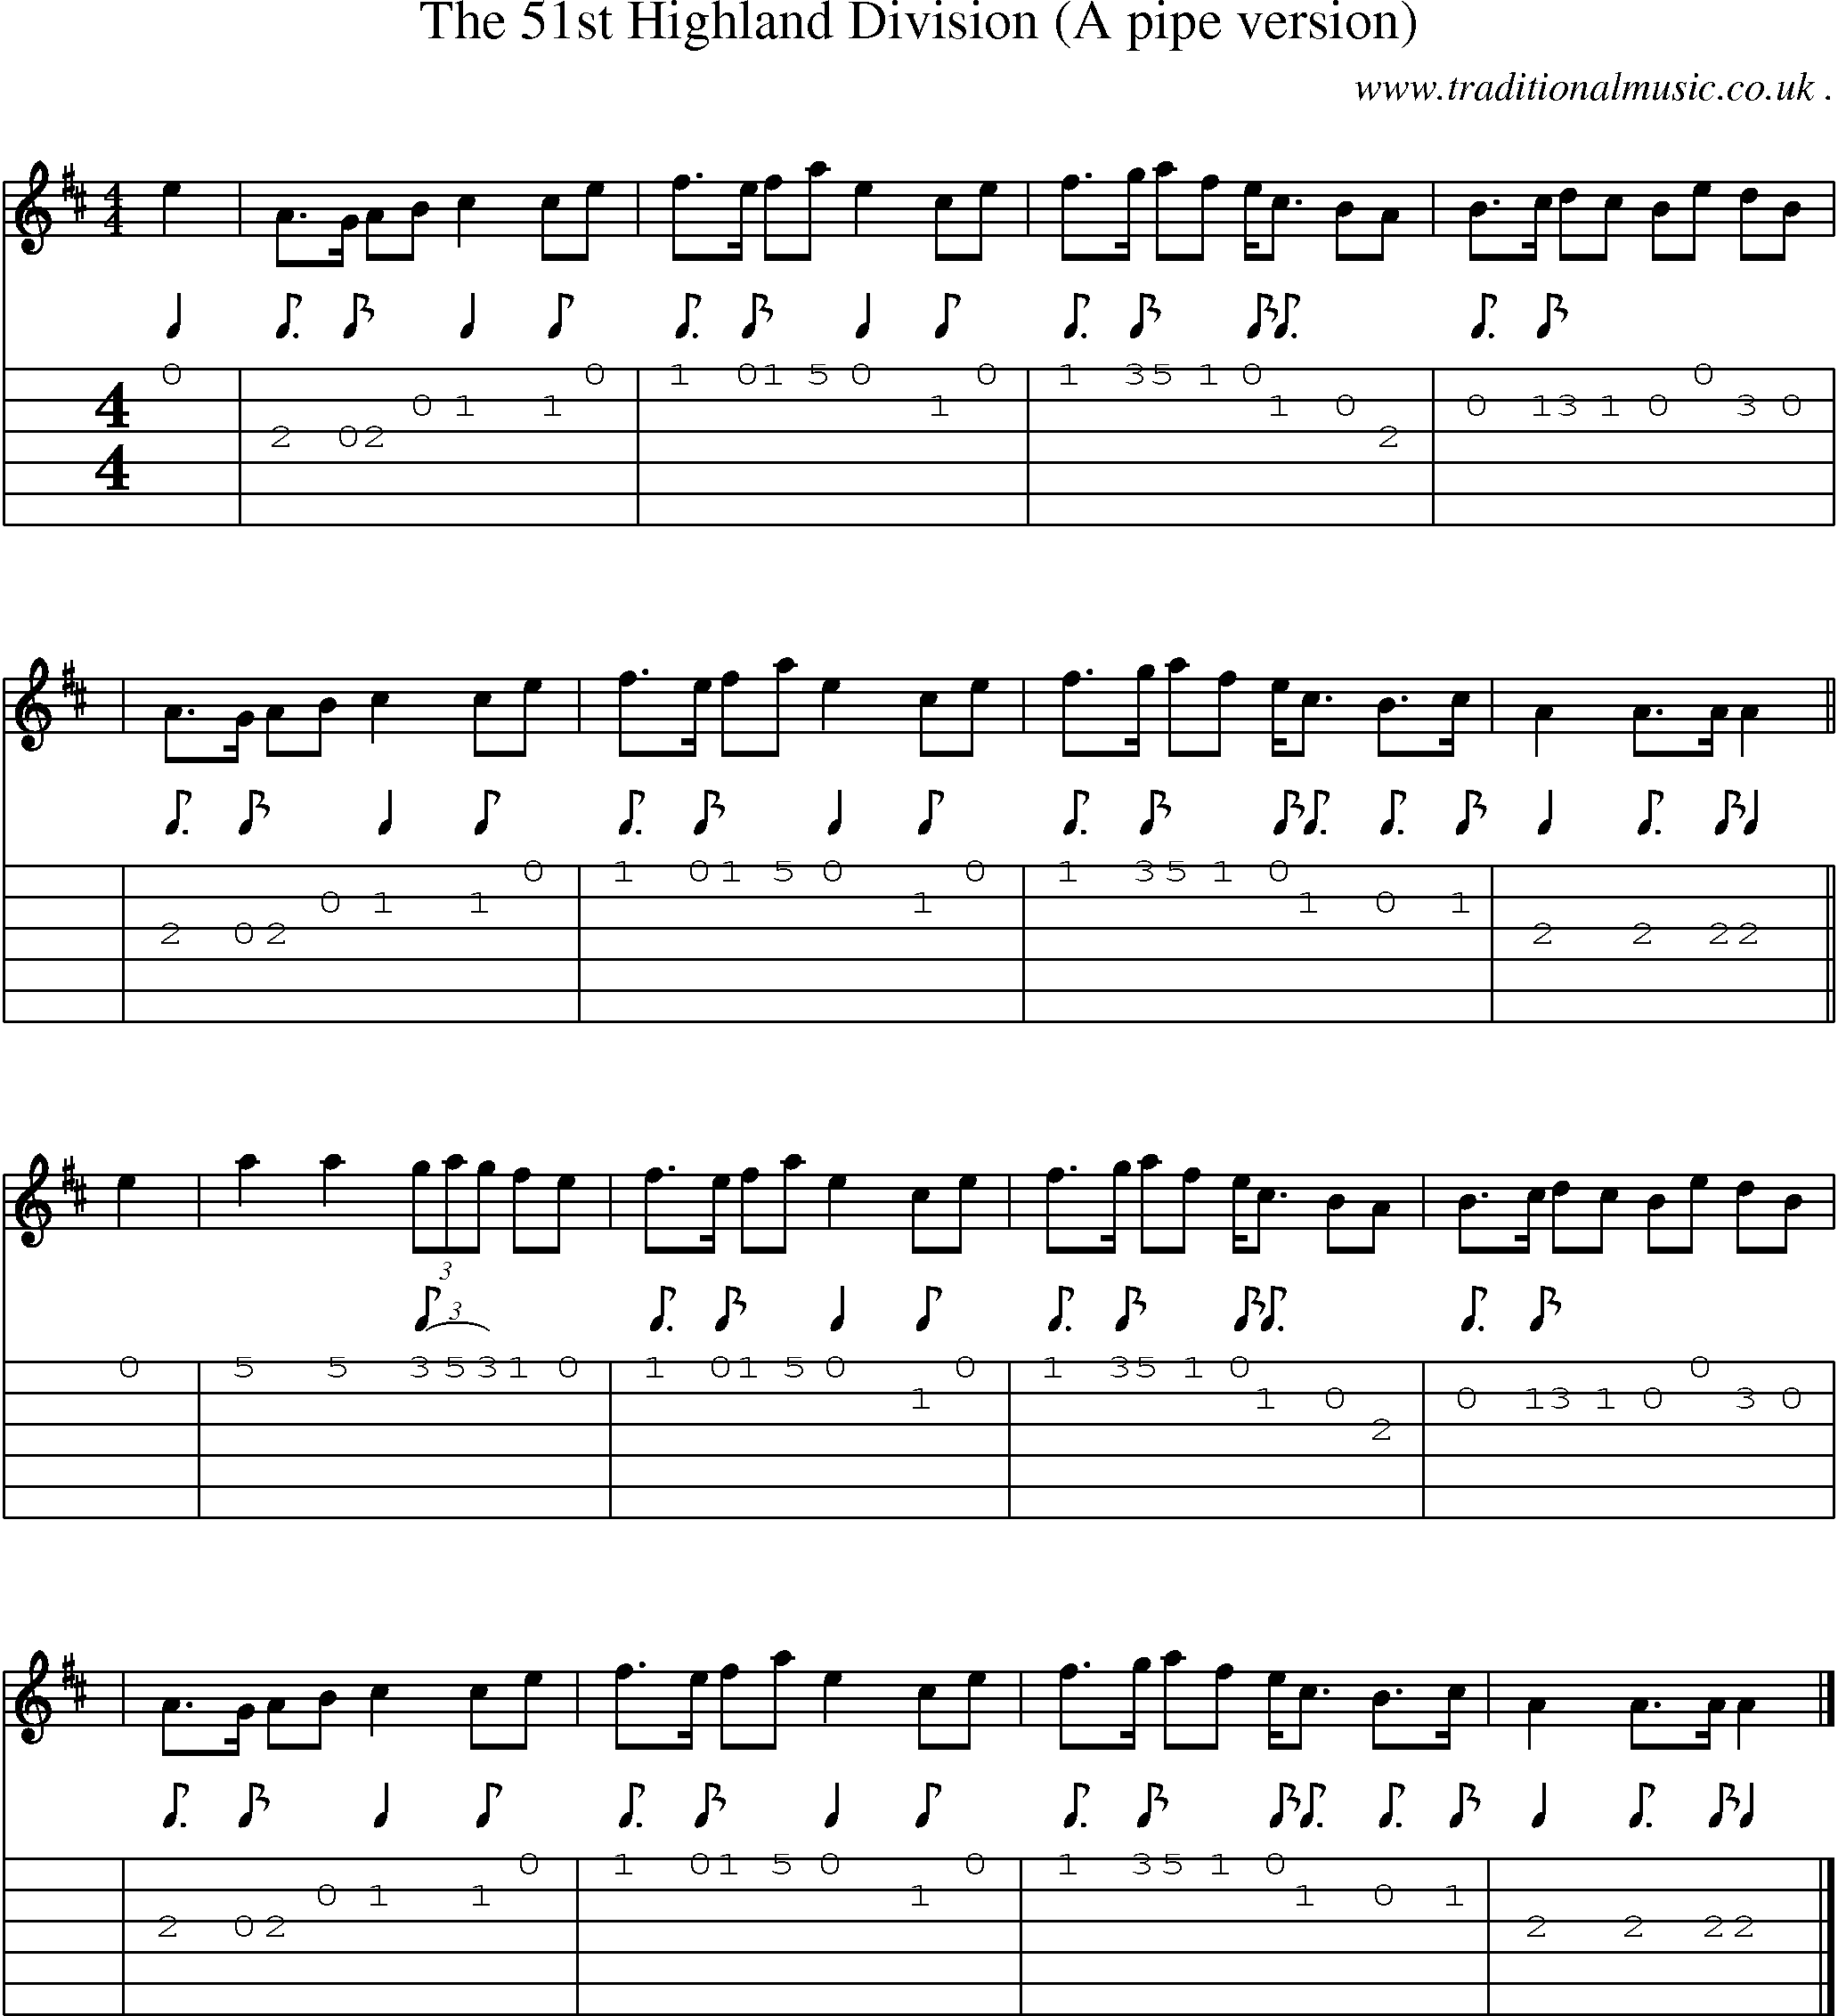 Sheet-music  score, Chords and Guitar Tabs for The 51st Highland Division A Pipe Version